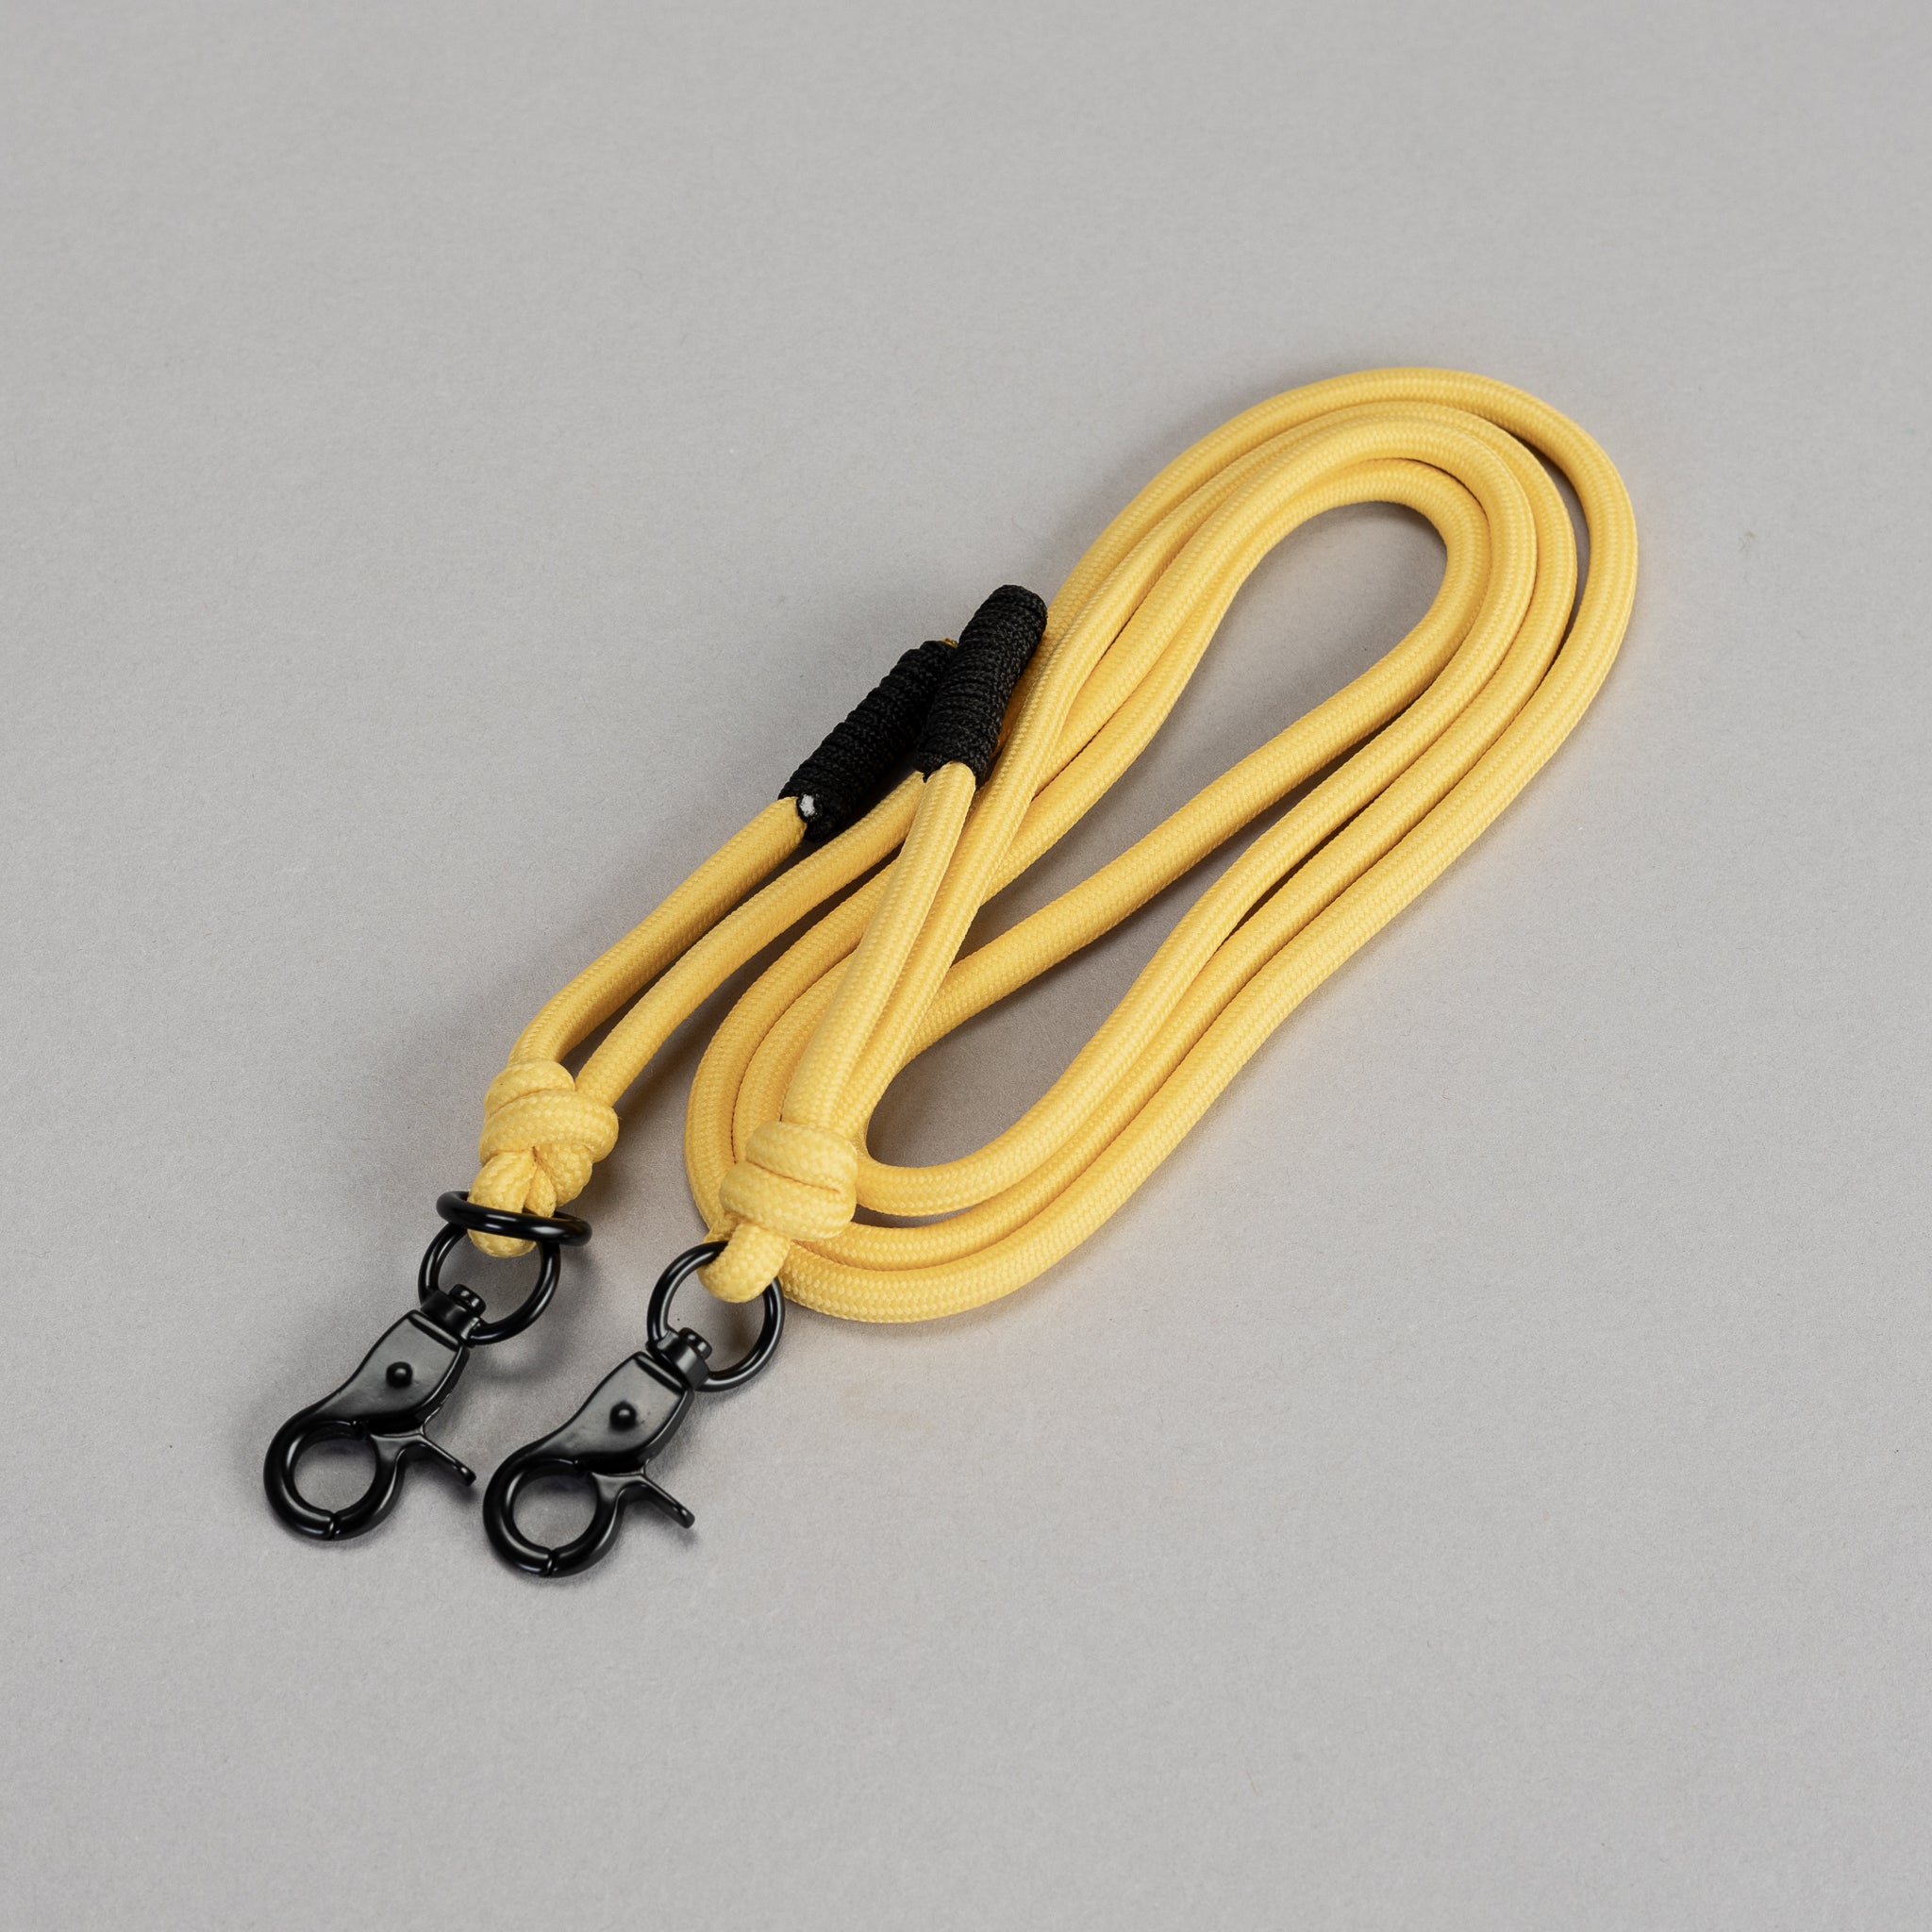 Rope 6mm – PROPERTY OF